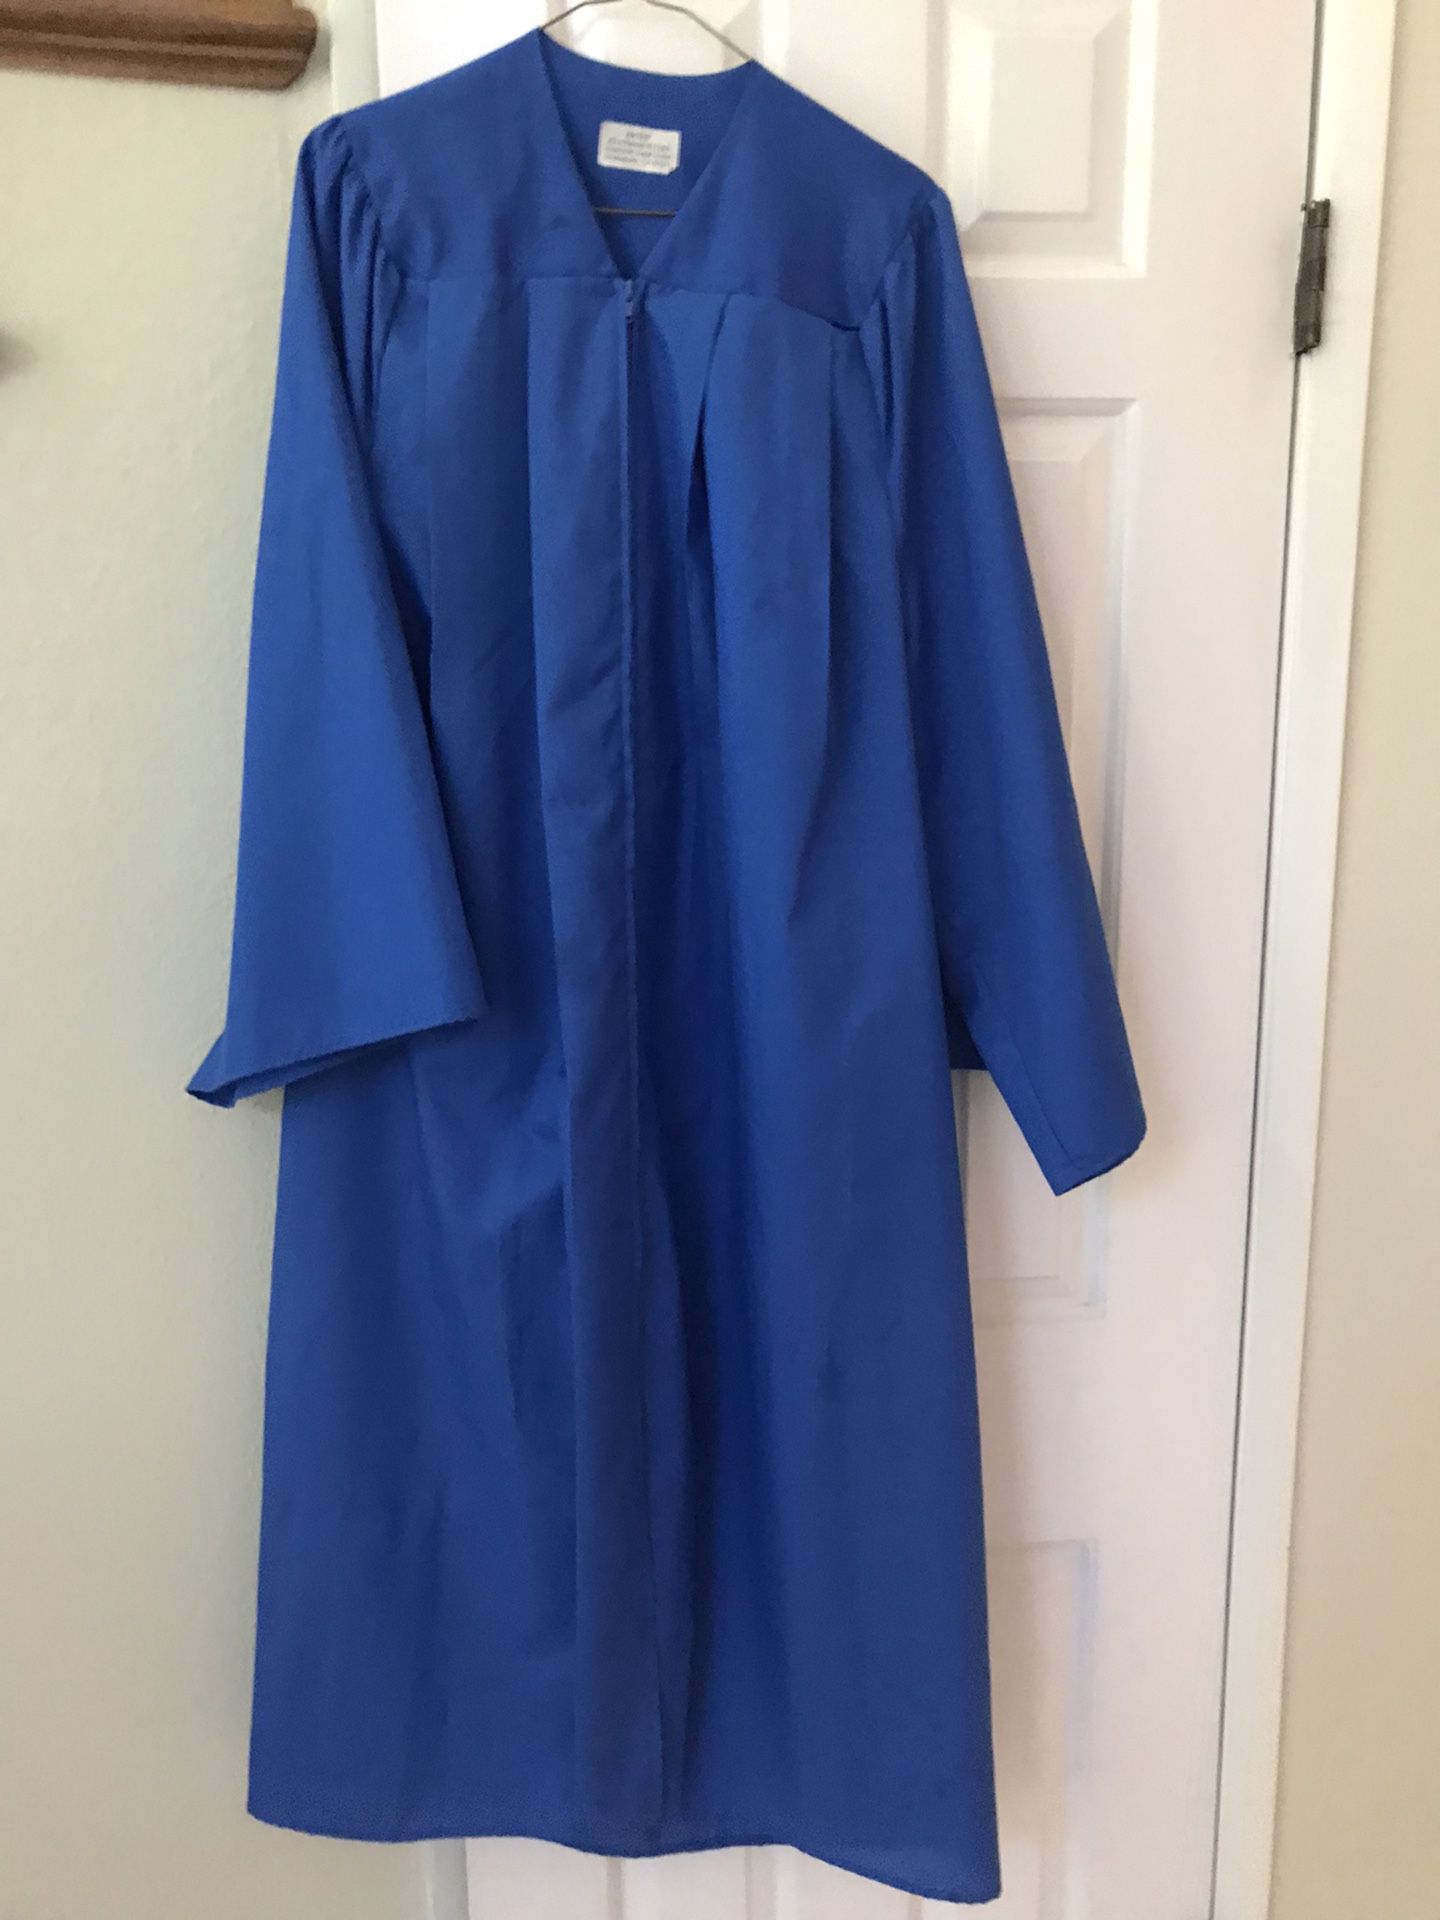 Academic Royal Blue Graduation Gown Only, 5’4” - 5’5”